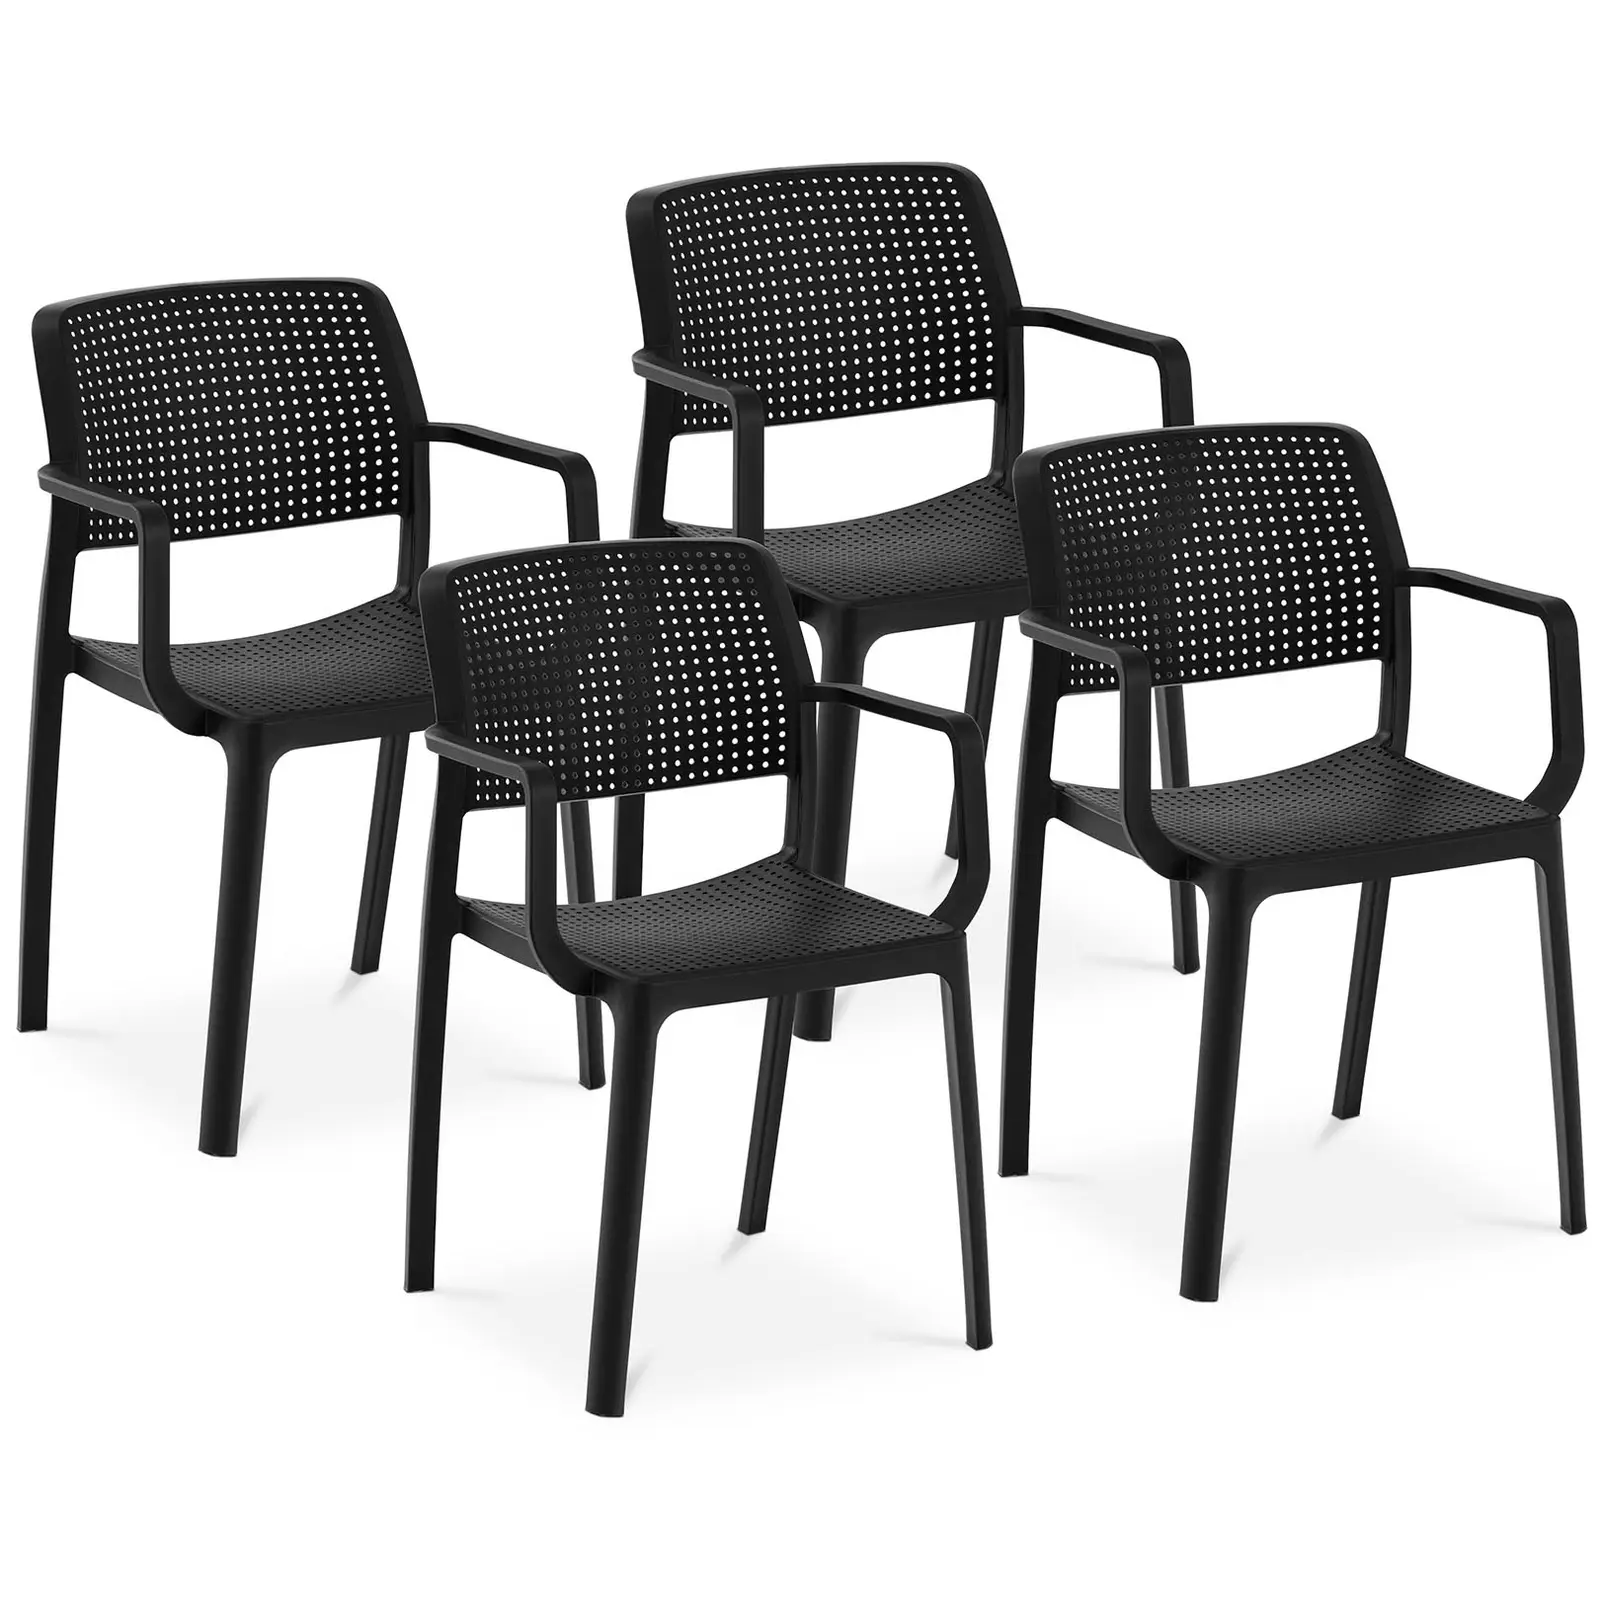 Chair - set of 4 - Royal Catering - up to 150 kg - backrest with air holes - armrests - black